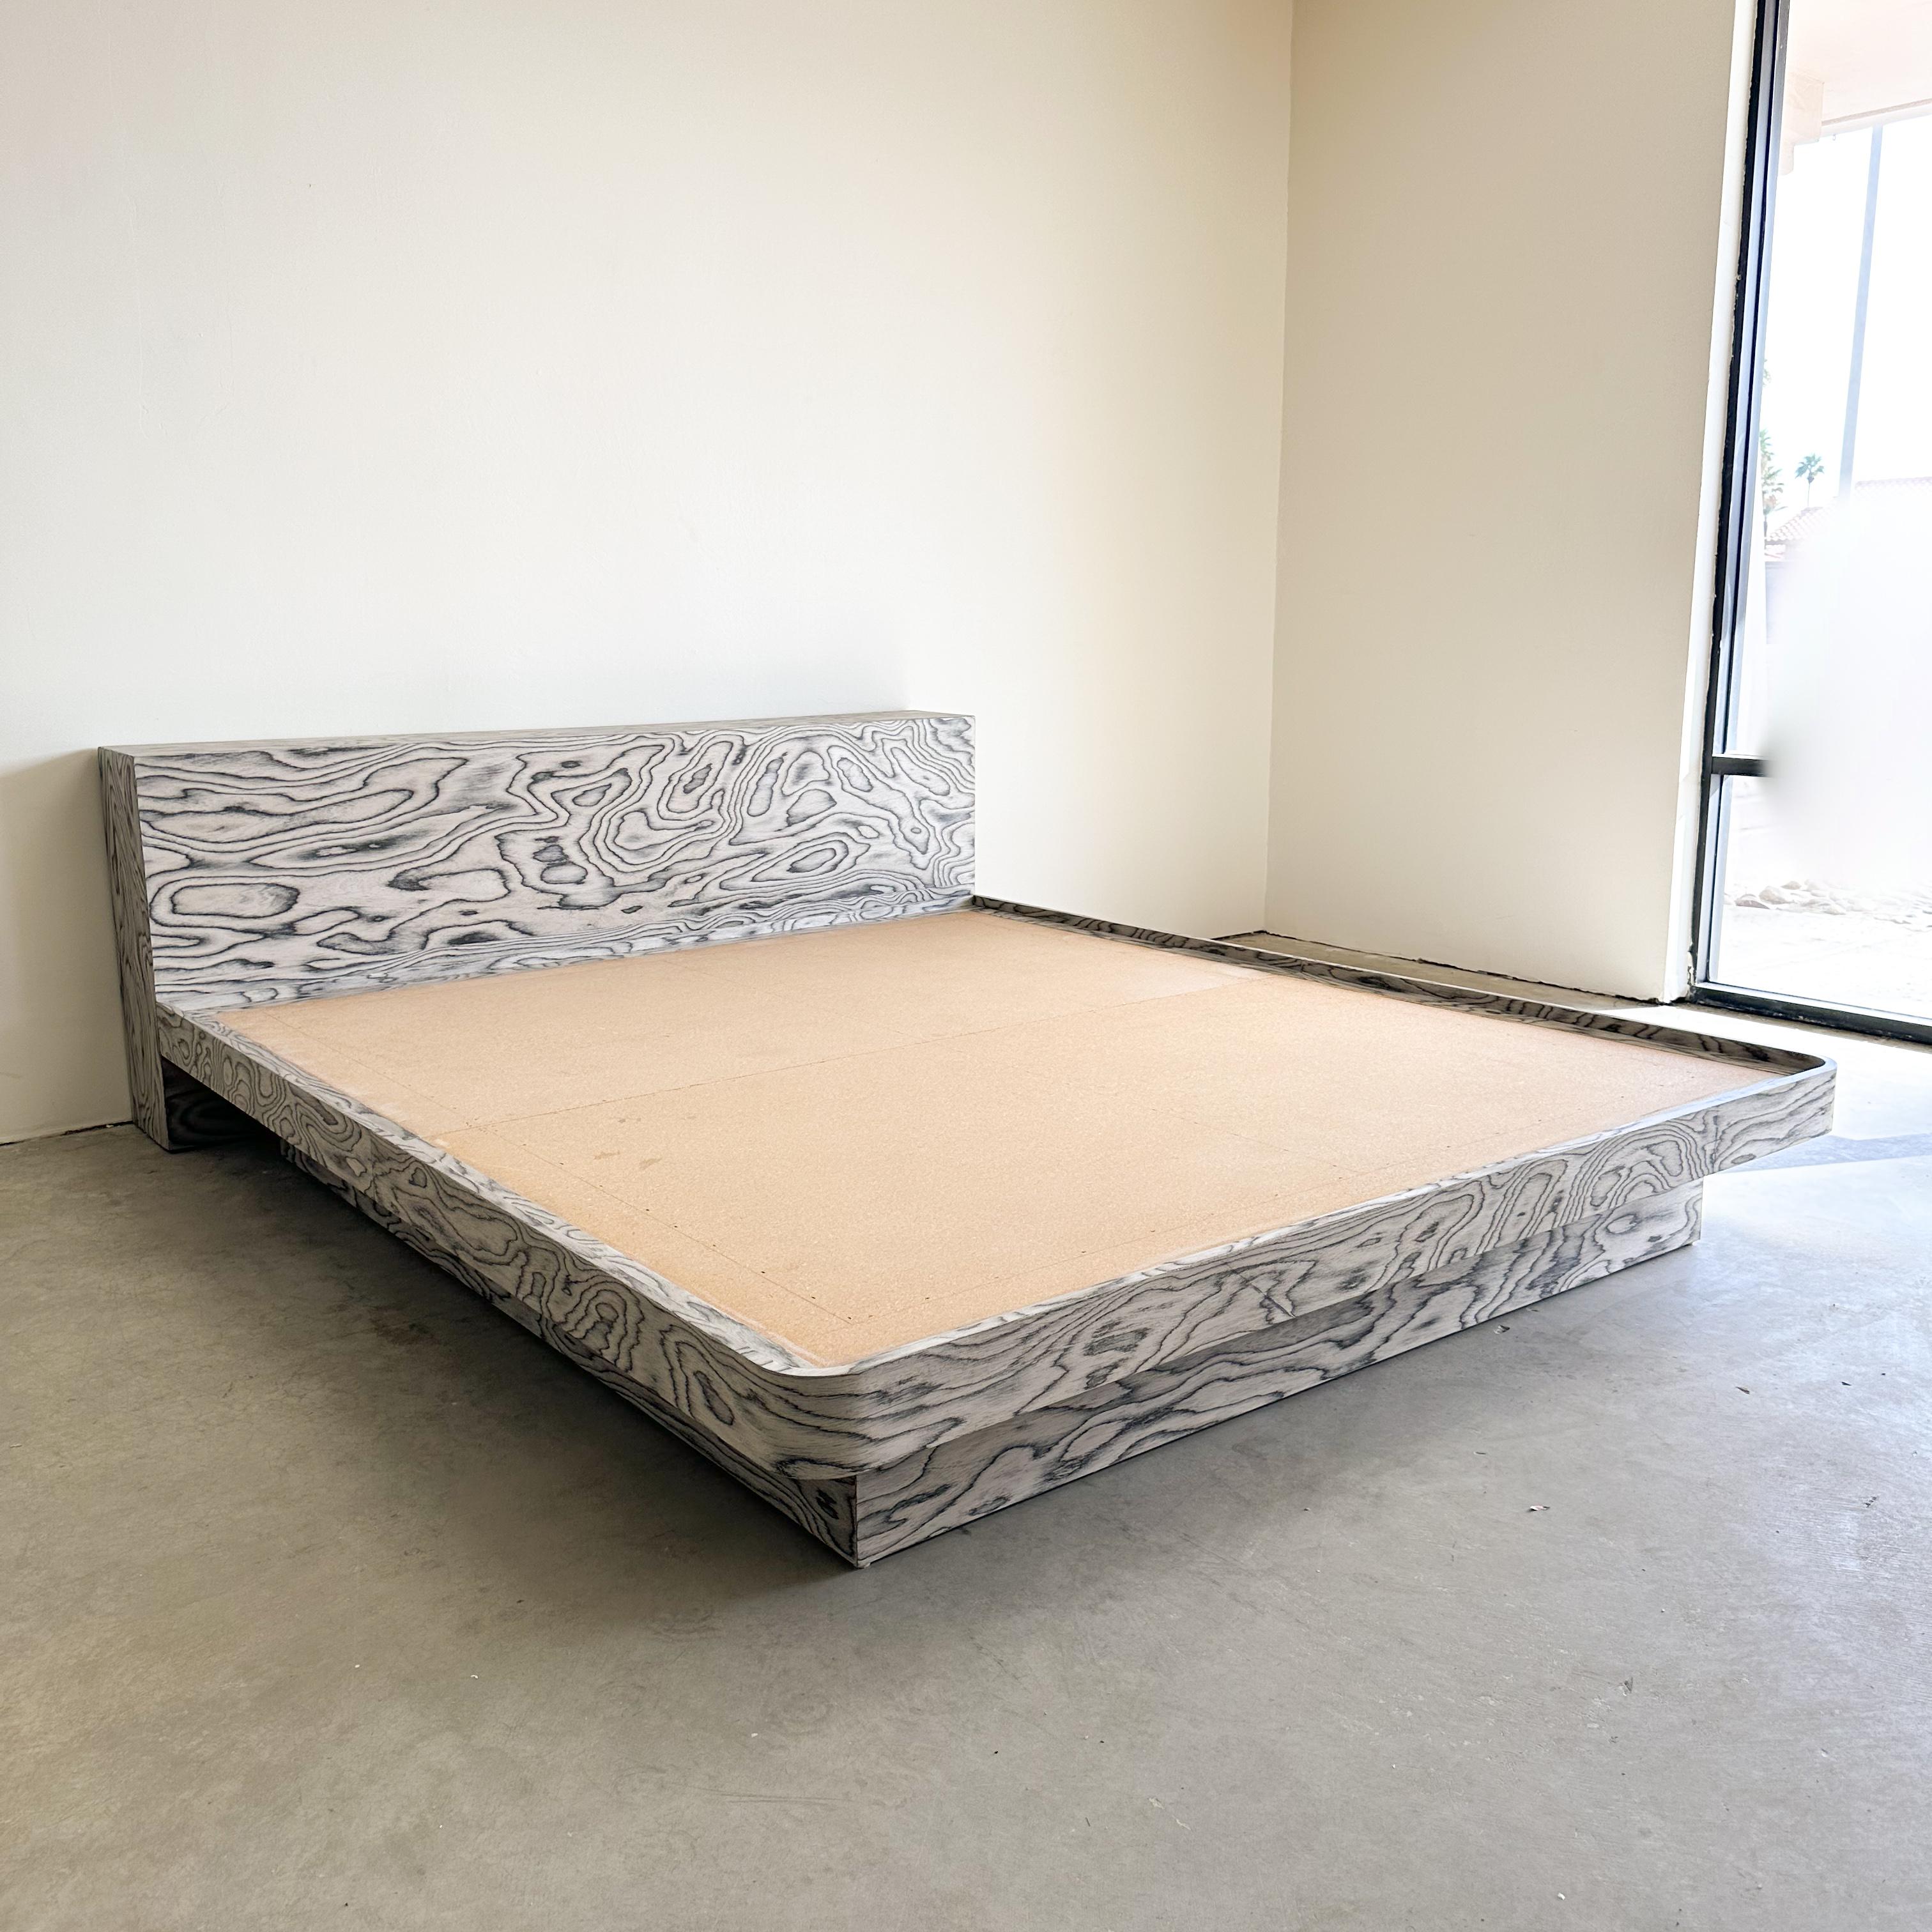 20th Century Vintage Postmodern Platform Bed And Headboard With Ettore Sottsass Veneer  For Sale